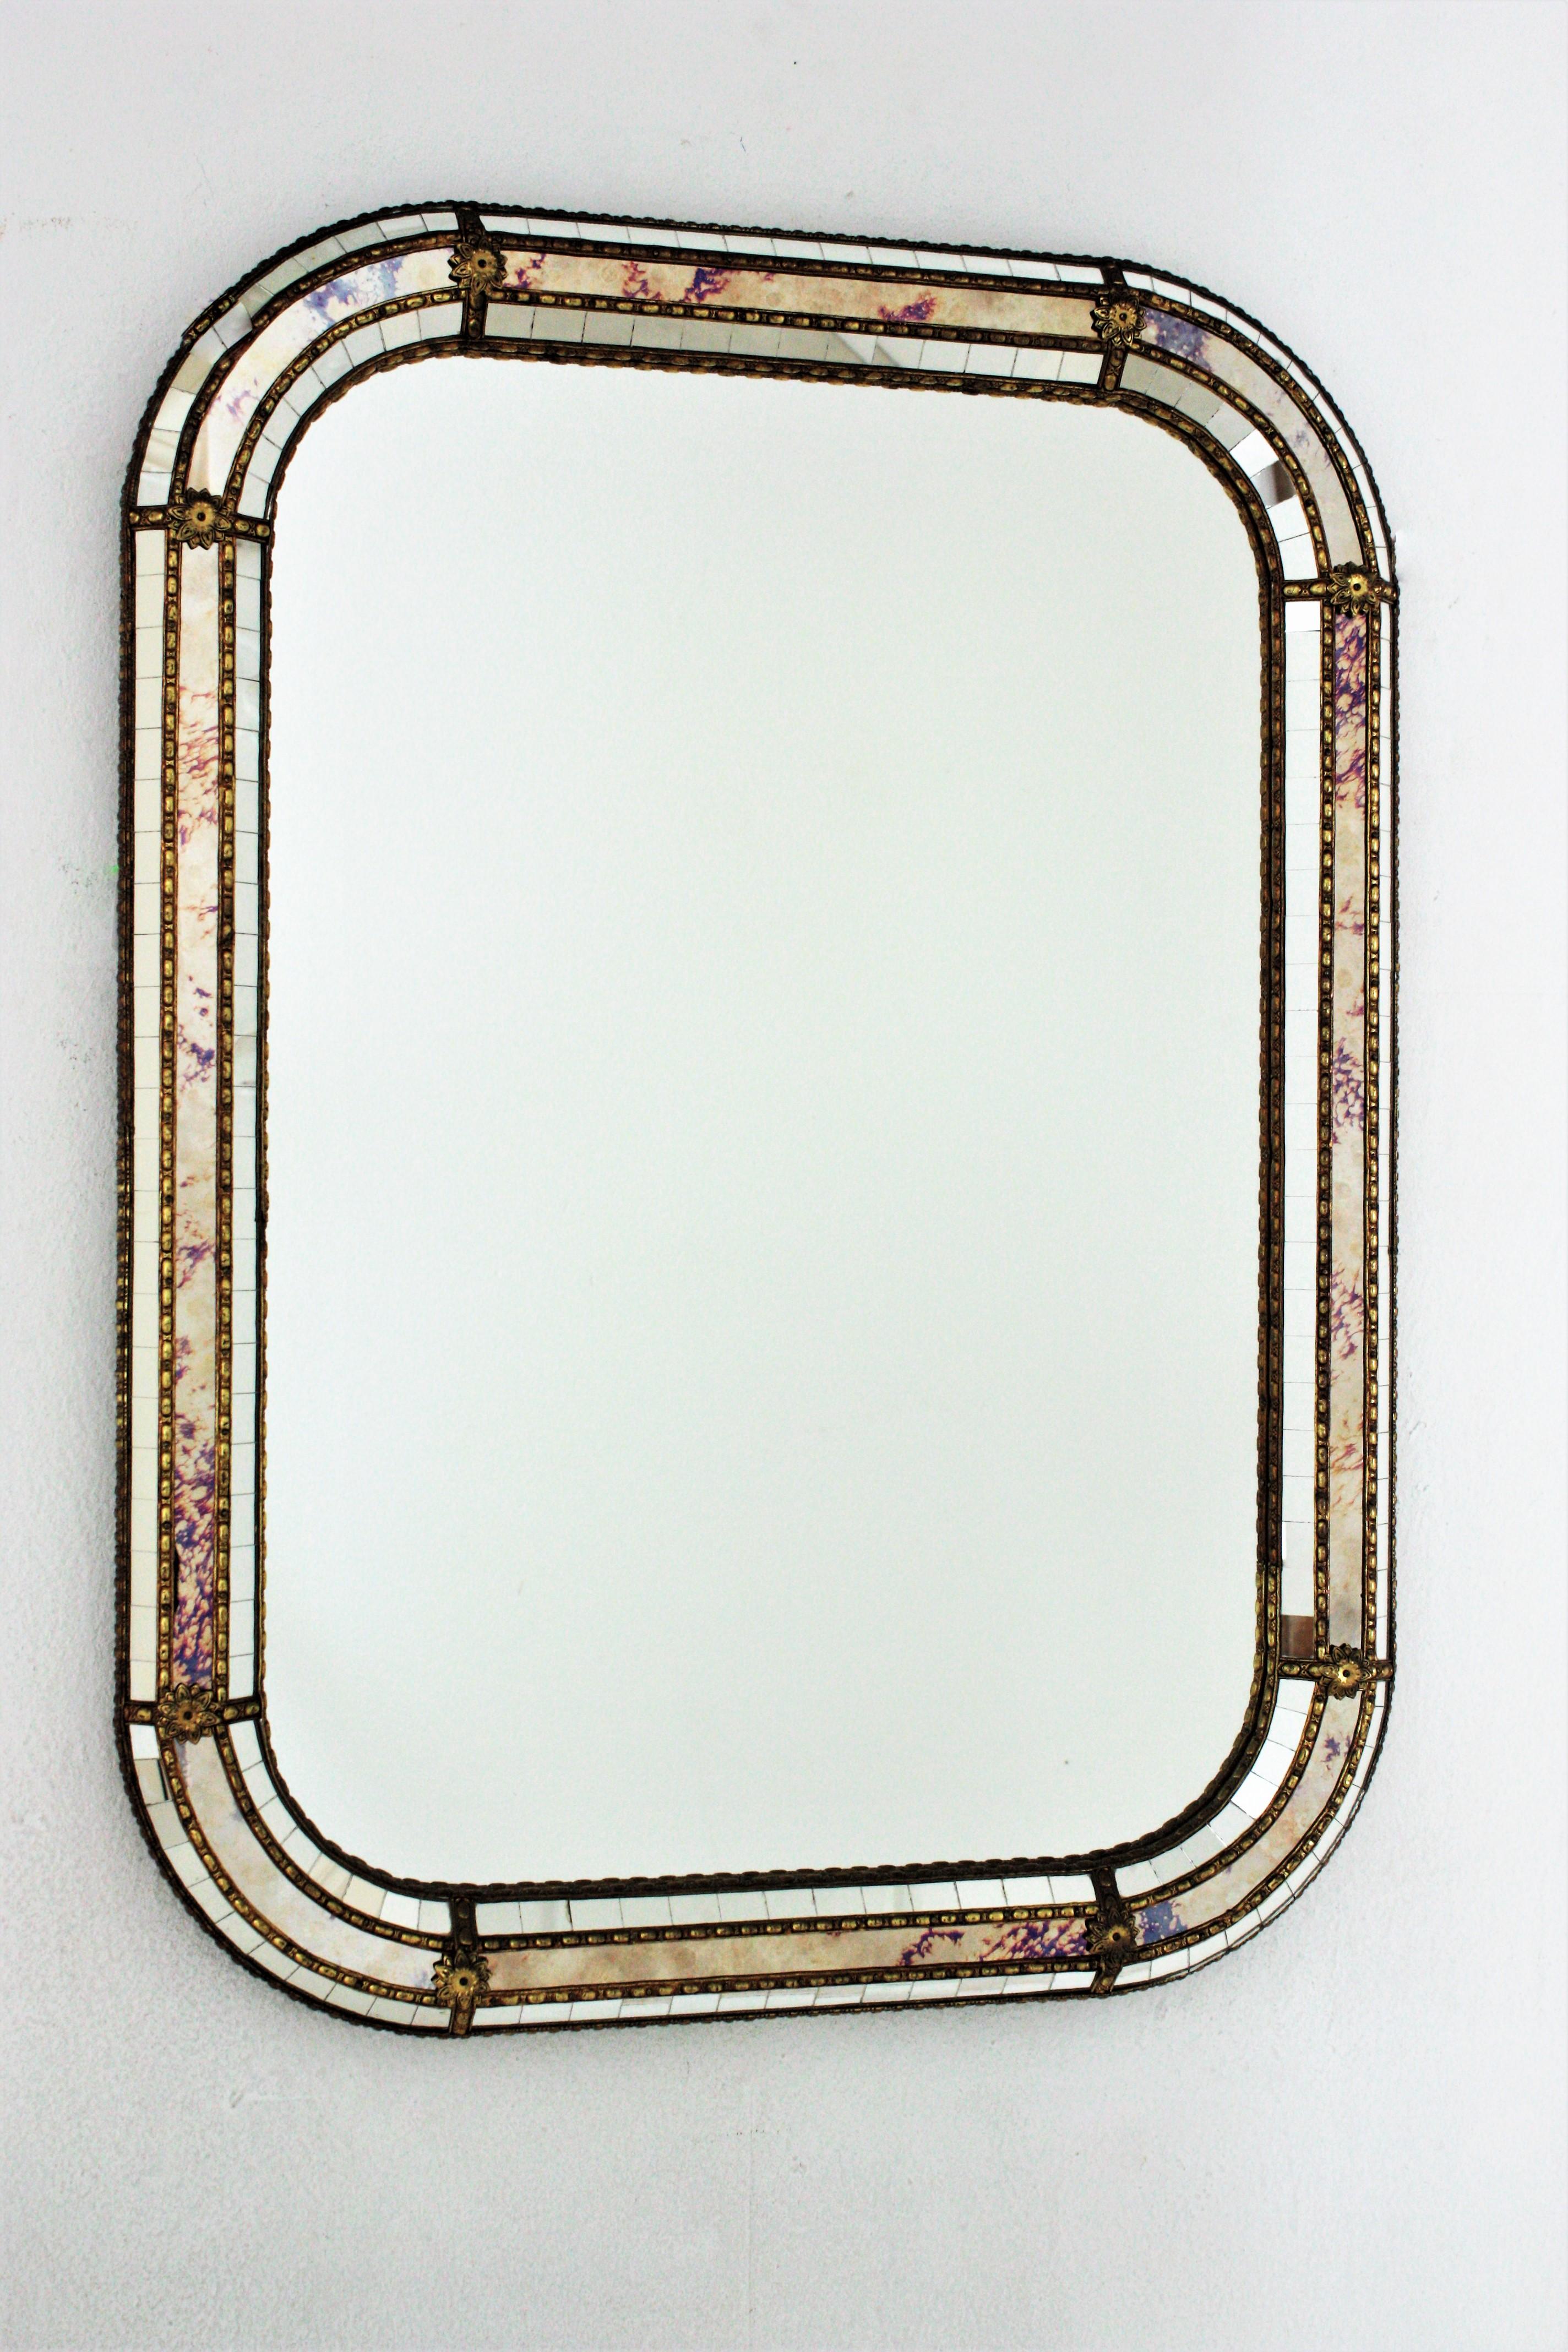 Venetian style rectangular wall mirror with iridiscent glasses and gilt metal accents, Spain, 1960s
This wall mirror has a triple mirror frame with rectangular shape and rounded corners. The central layer is made of iridiscent glasses in shades from